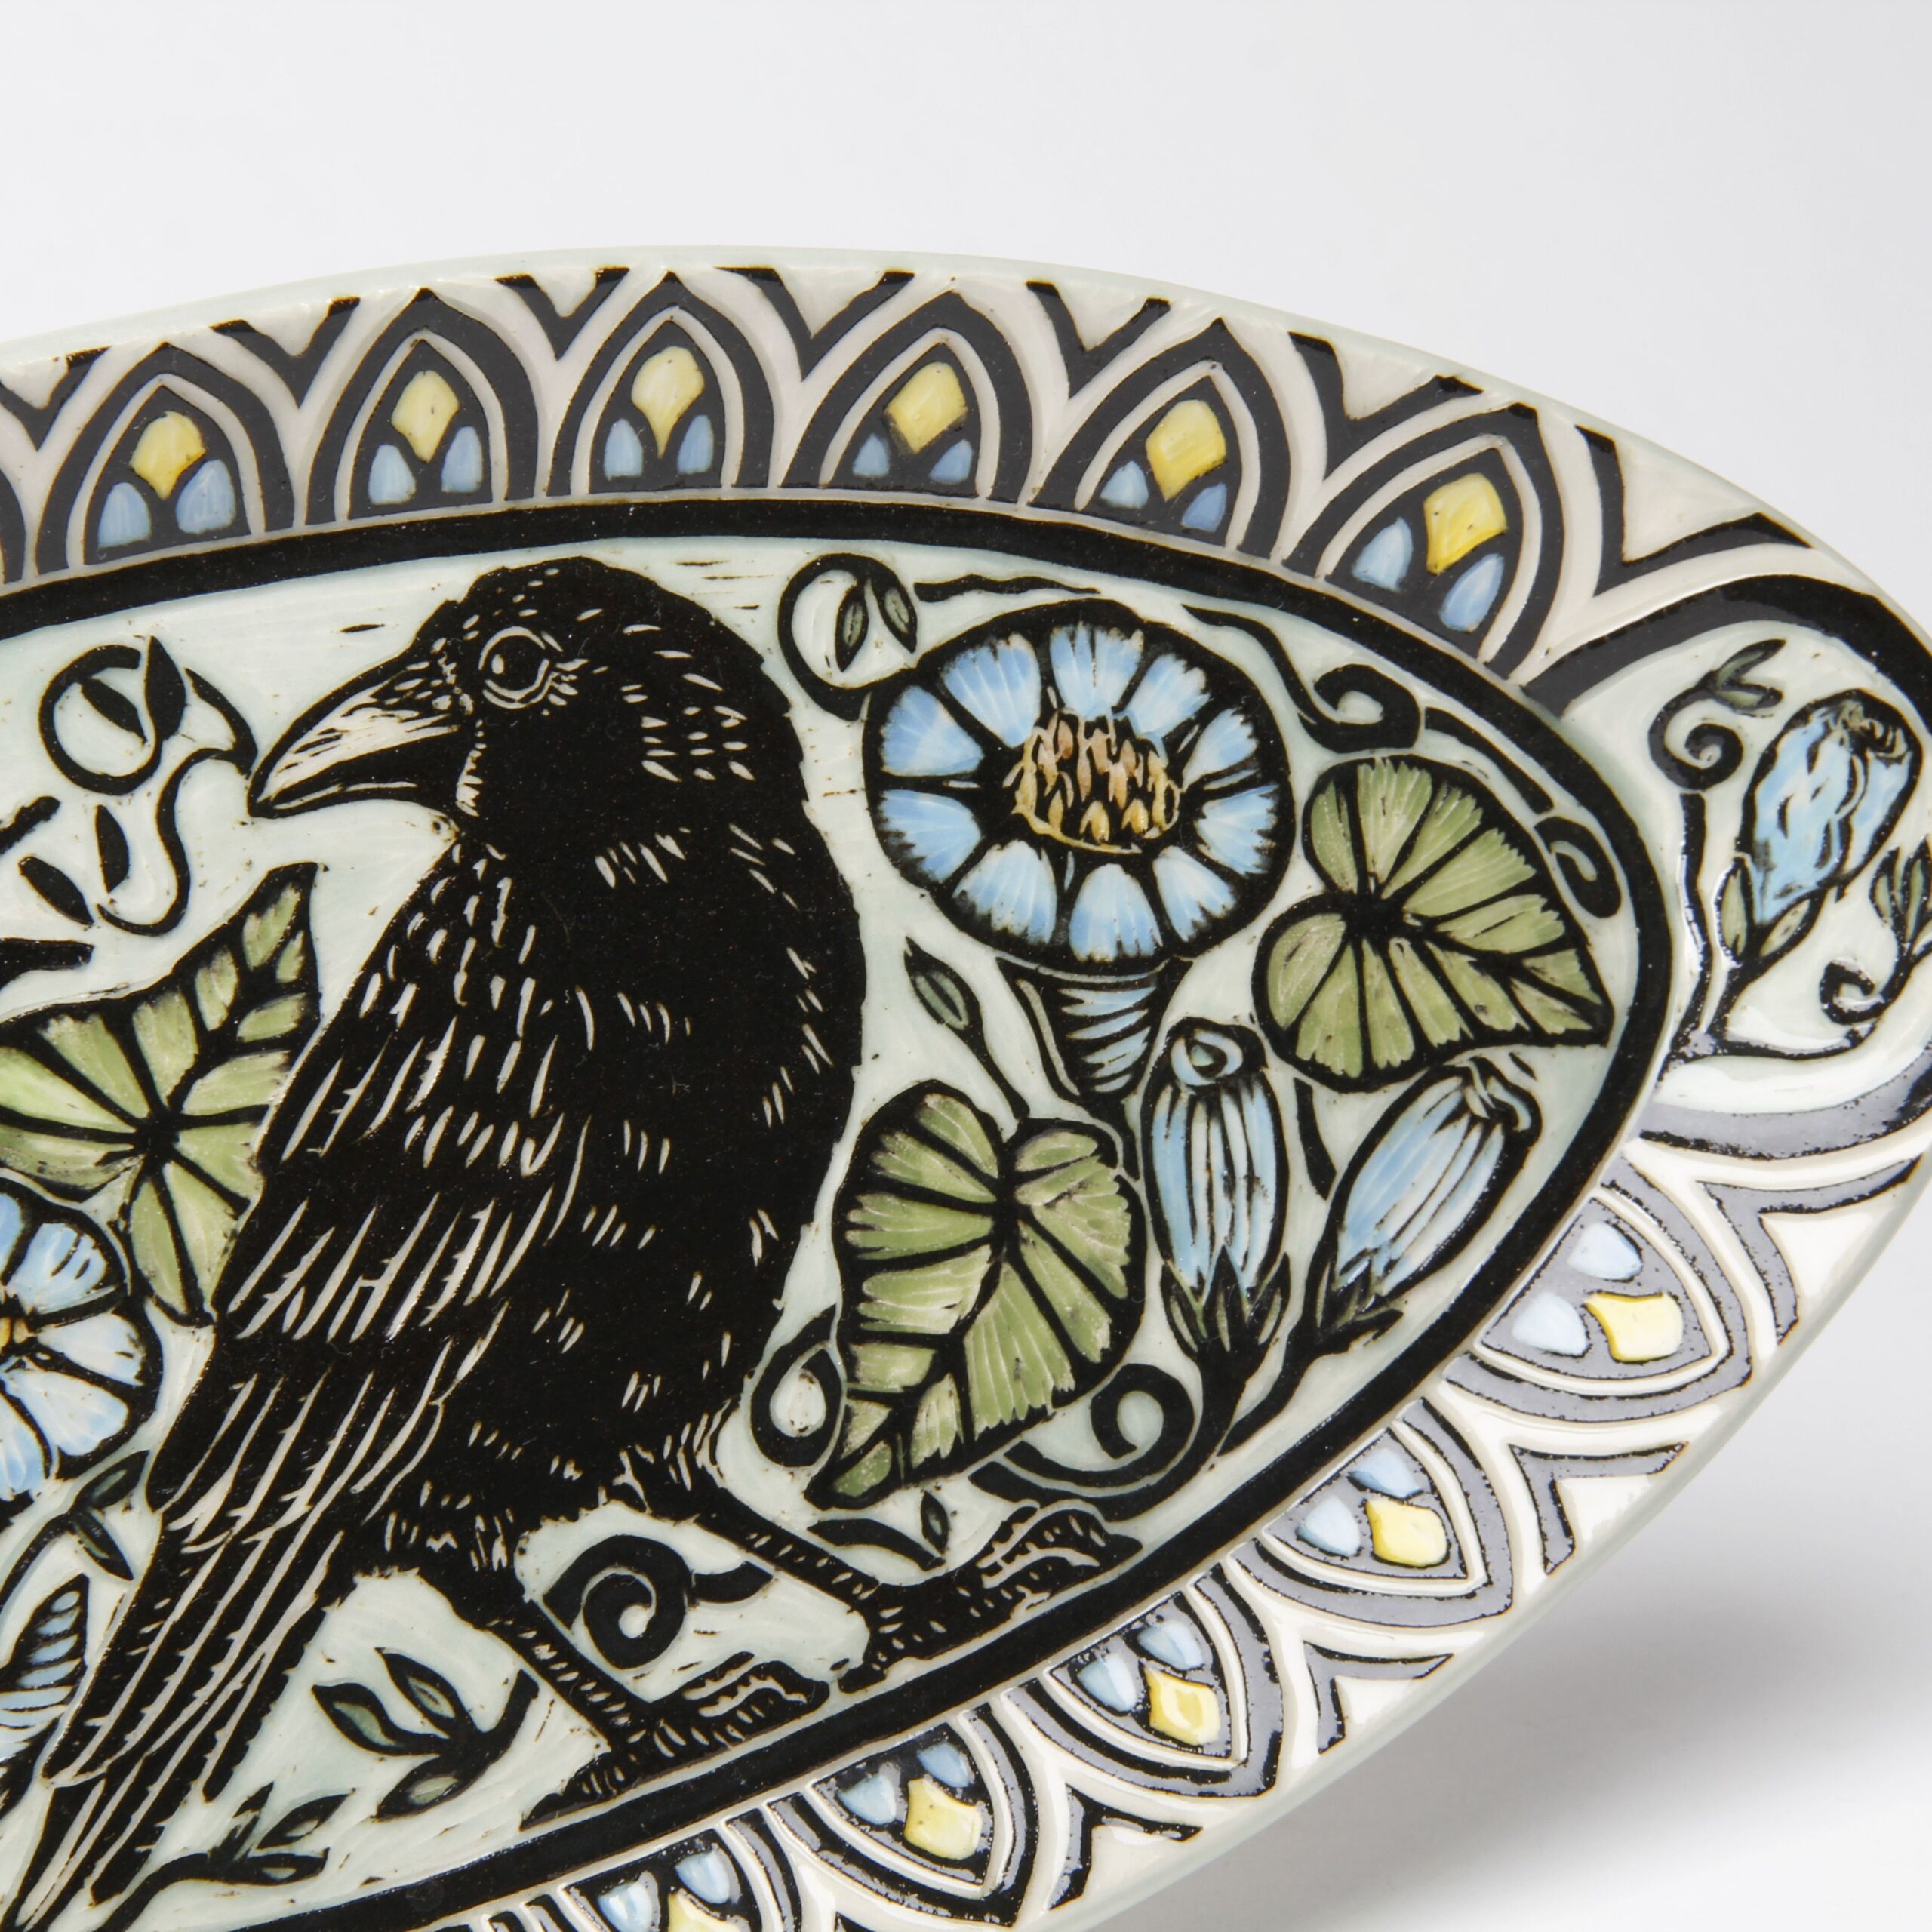 Jocelyn Jenkins: Sgraffito Crow Oval Plate Product Image 3 of 3